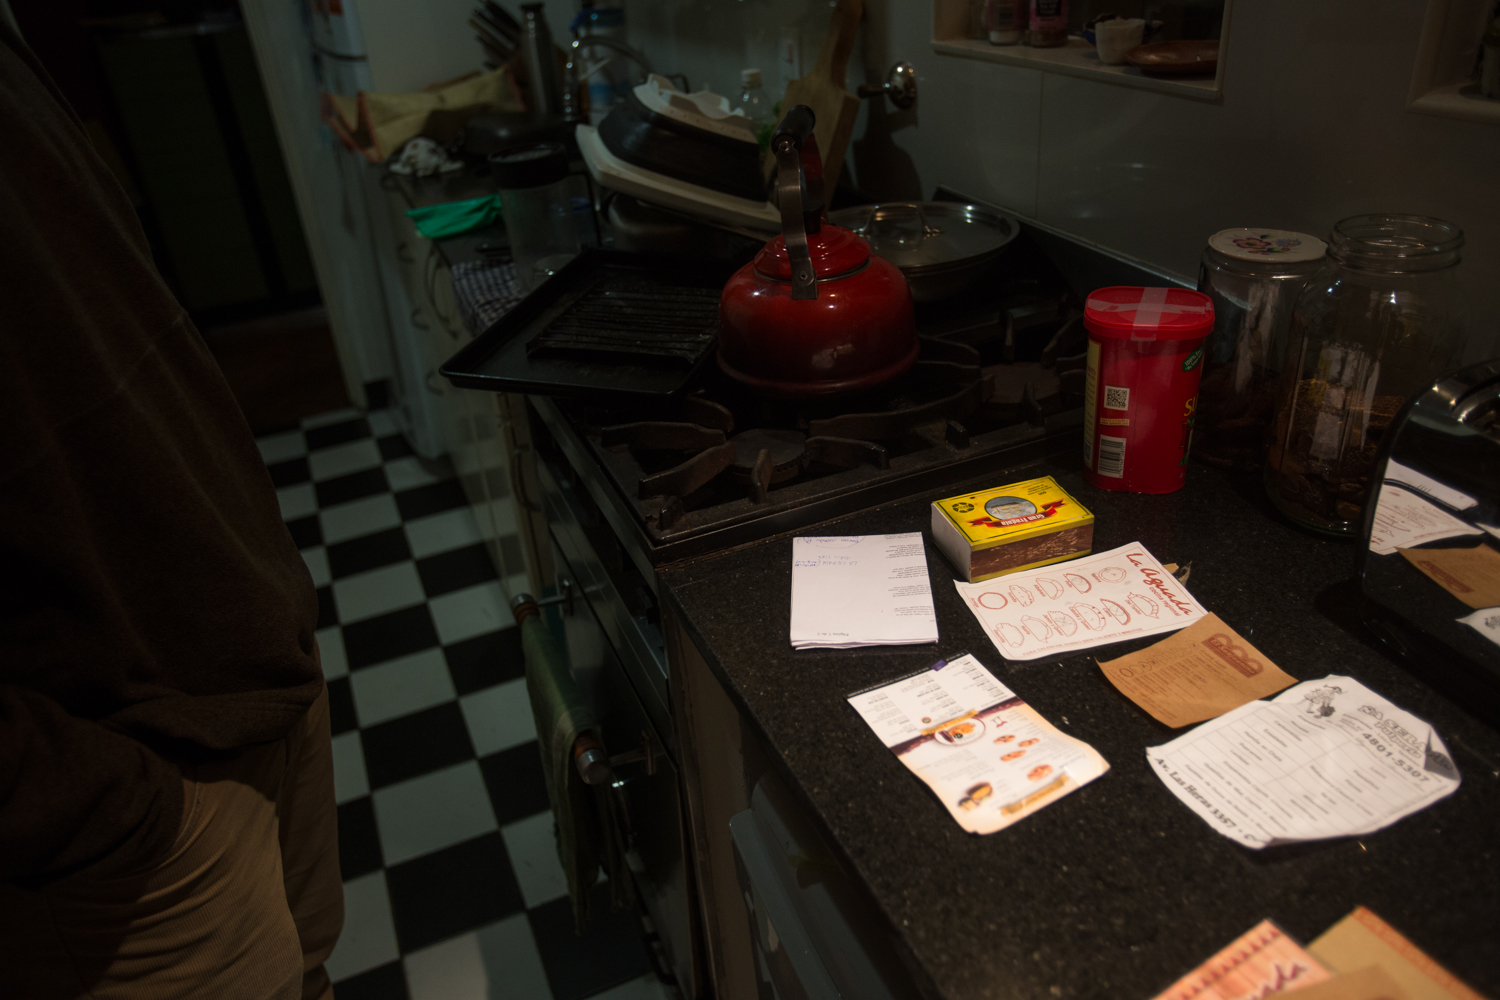  When we got home, Walter organized the menus and empanada diagrams so that we'd know which was which. 